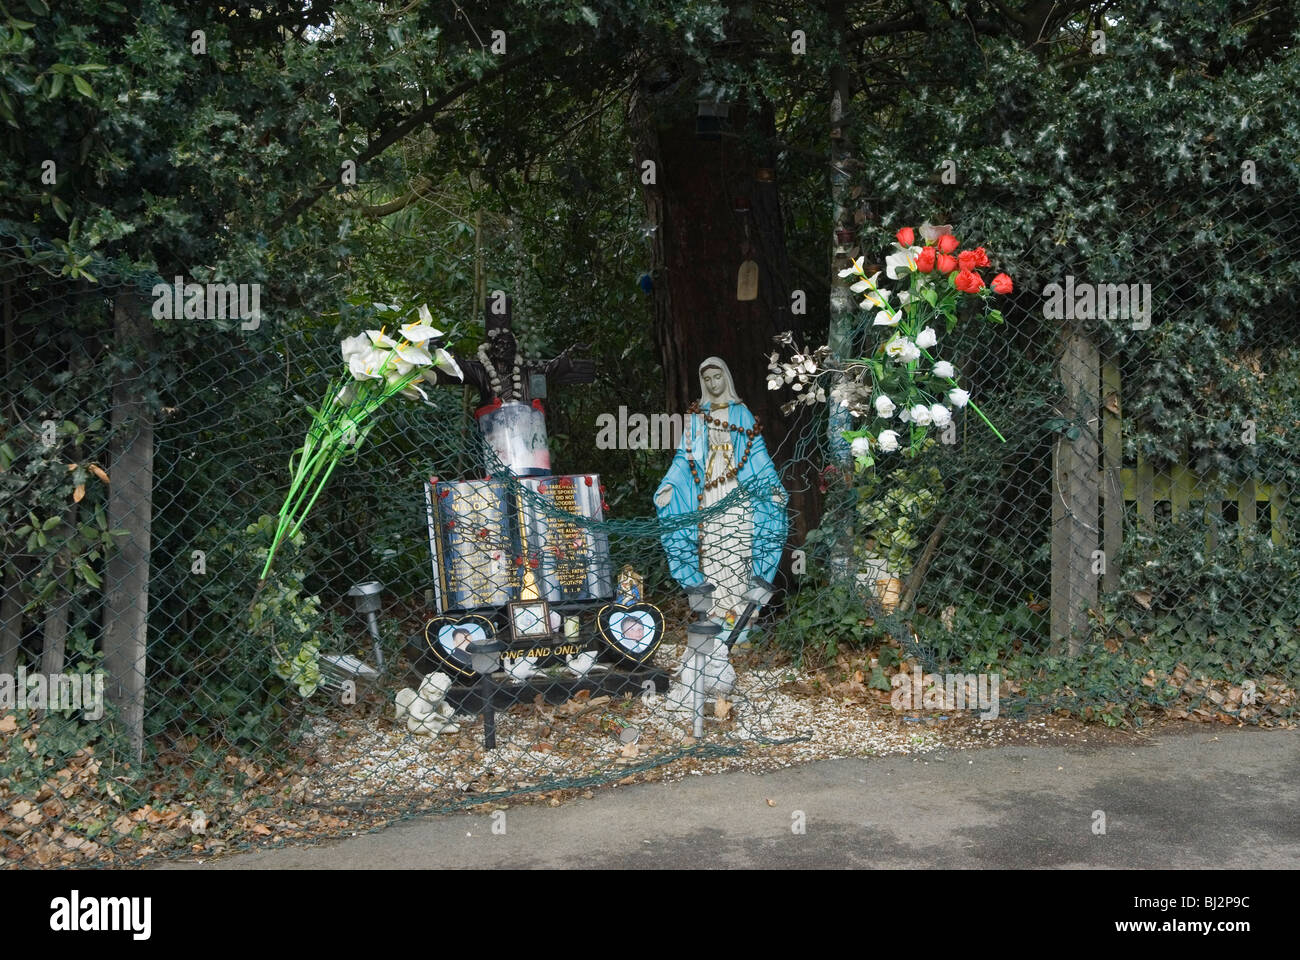 Roadside accident memorial a Catholic shrine to young person killed in car accident. Sydenham Hill South London UK 2010 2010s HOMER SYKES Stock Photo